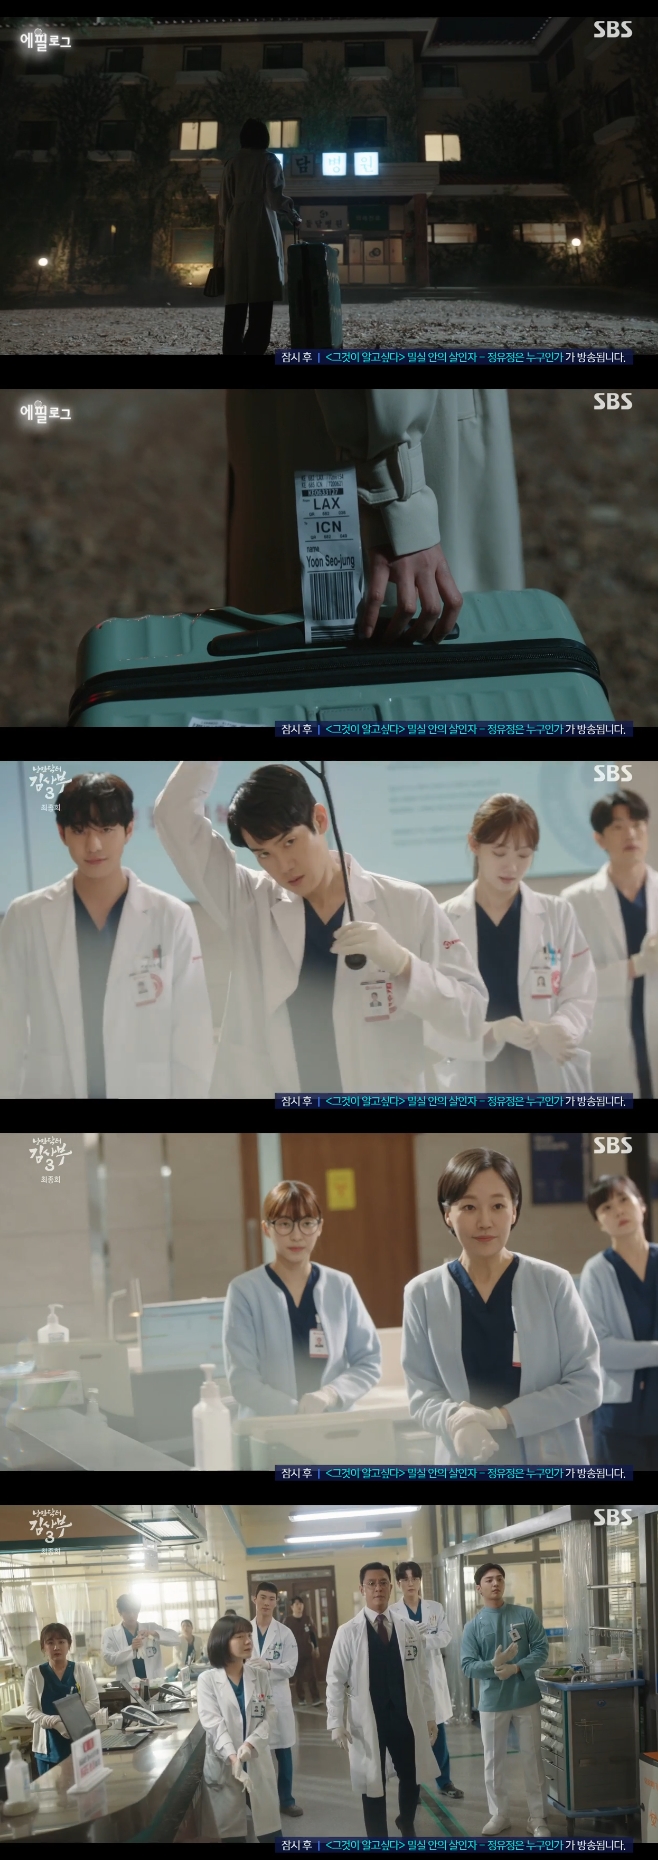 Dr. Romantic3 ended with an ending that suggested season 4.On the night of the 17th, SBS gold drama Dr. Romantic3 (playwright Kang Eun-kyung and director Yoo In-sik) In the last meeting, the appearance of the Stone wallHospital family was drawn one step further in their dream.On this day, Kang dong-ju (played by Kim) received phone calls from firemen, others, and others.They were phone calls from Sejo-jung (played by Sejo-hyung-jin), not others.Kang dong-ju said, Im all right.My juniors are good.Im good.Im good.Im good.Im good.Im good.Im good.Im good.Im good.Im good.Im good.Im good.Im good.Im good.Im good.Im good.Im good.Im good.Im good.Im good. I did it.I have heard good news that I have passed the big crisis. Stone wallhospital for patients.Ko Kyung-sook explained why she changed her mind, saying, Once again, Ill fall for your words.Ill see you through.Youll have to prove to me every year what youre trying to accomplish.Kang Dong-ju asked Seo Woo Jin if he had changed his mind, and Seo Woo Jin asked, What kind of trauma center do you draw? I asked.Constantly unreleased, unreleased, unreleased, unreleased, unreleased, unreleased, unreleased, unreleased, unreleased, unreleased, unreleased, unreleased, unreleased, unrele, unreleased, unrele, unrele, unrele, unrele, unreleased, unrele, unrele, unrele, unrele, unrele, unrele, unreleased, unrele, unrele, unreleased, unrele, unrele, unrele, unrele, unrele, unre He offered to run with him.Stone wallHospital is still far away, but it has been gradually changing. Seo Woo Jin, Cha Eun-jae (Lee Sung-kyung), Park Min-gook (Kim Ju-hun) and Jung In-soo (Yoonnamu) centered on Master (Han Suk-kyu) and new faces were growing rapidly.A nice guest even appeared here. A late evening person took a taxi in front of the hospital. The carrier had the name yoon seo-jung, and when he turned to the hospital, the Stone wallHospital four letters started to light up.Romantics return to season four was unexpected.Dr. Romantic3